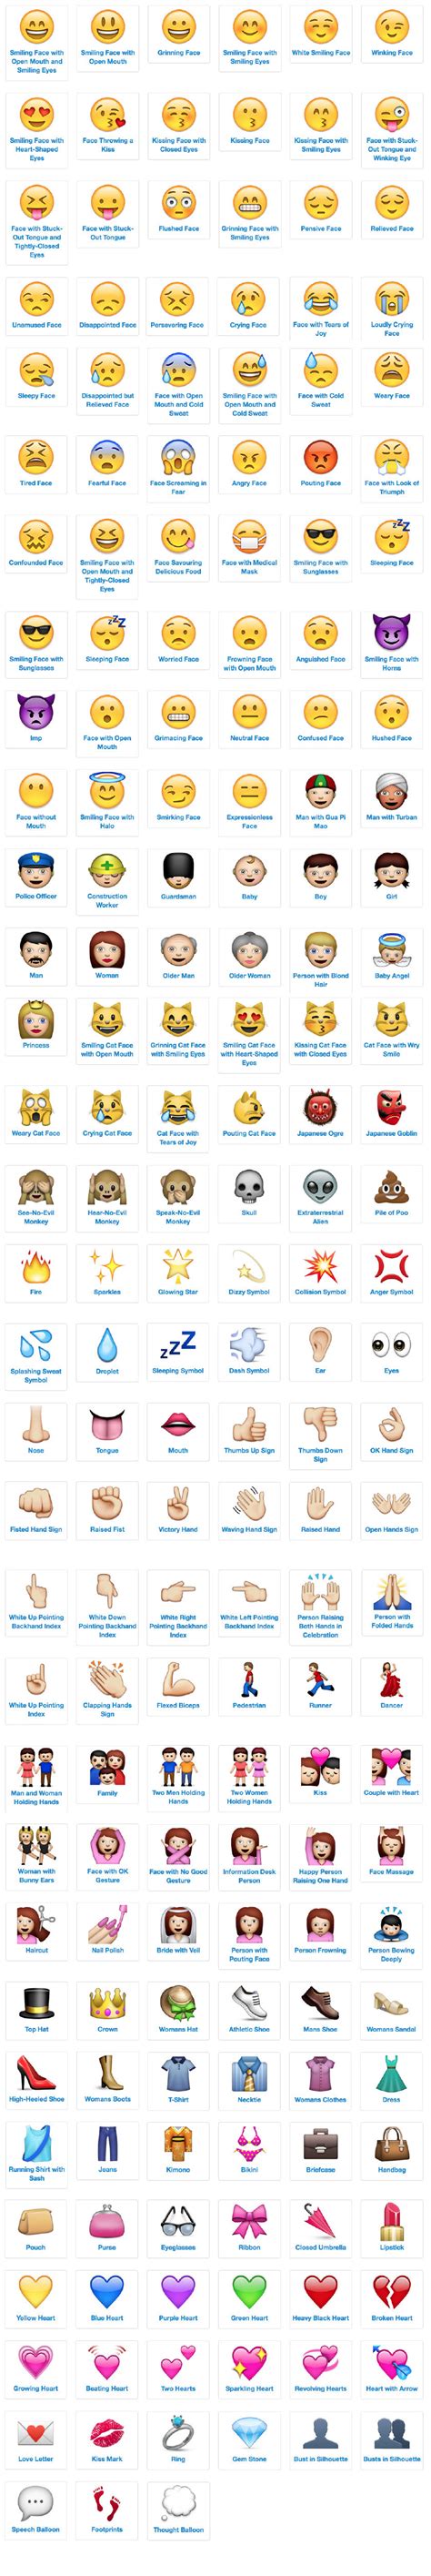 emoji people icons list with meanings and definitions | A ...